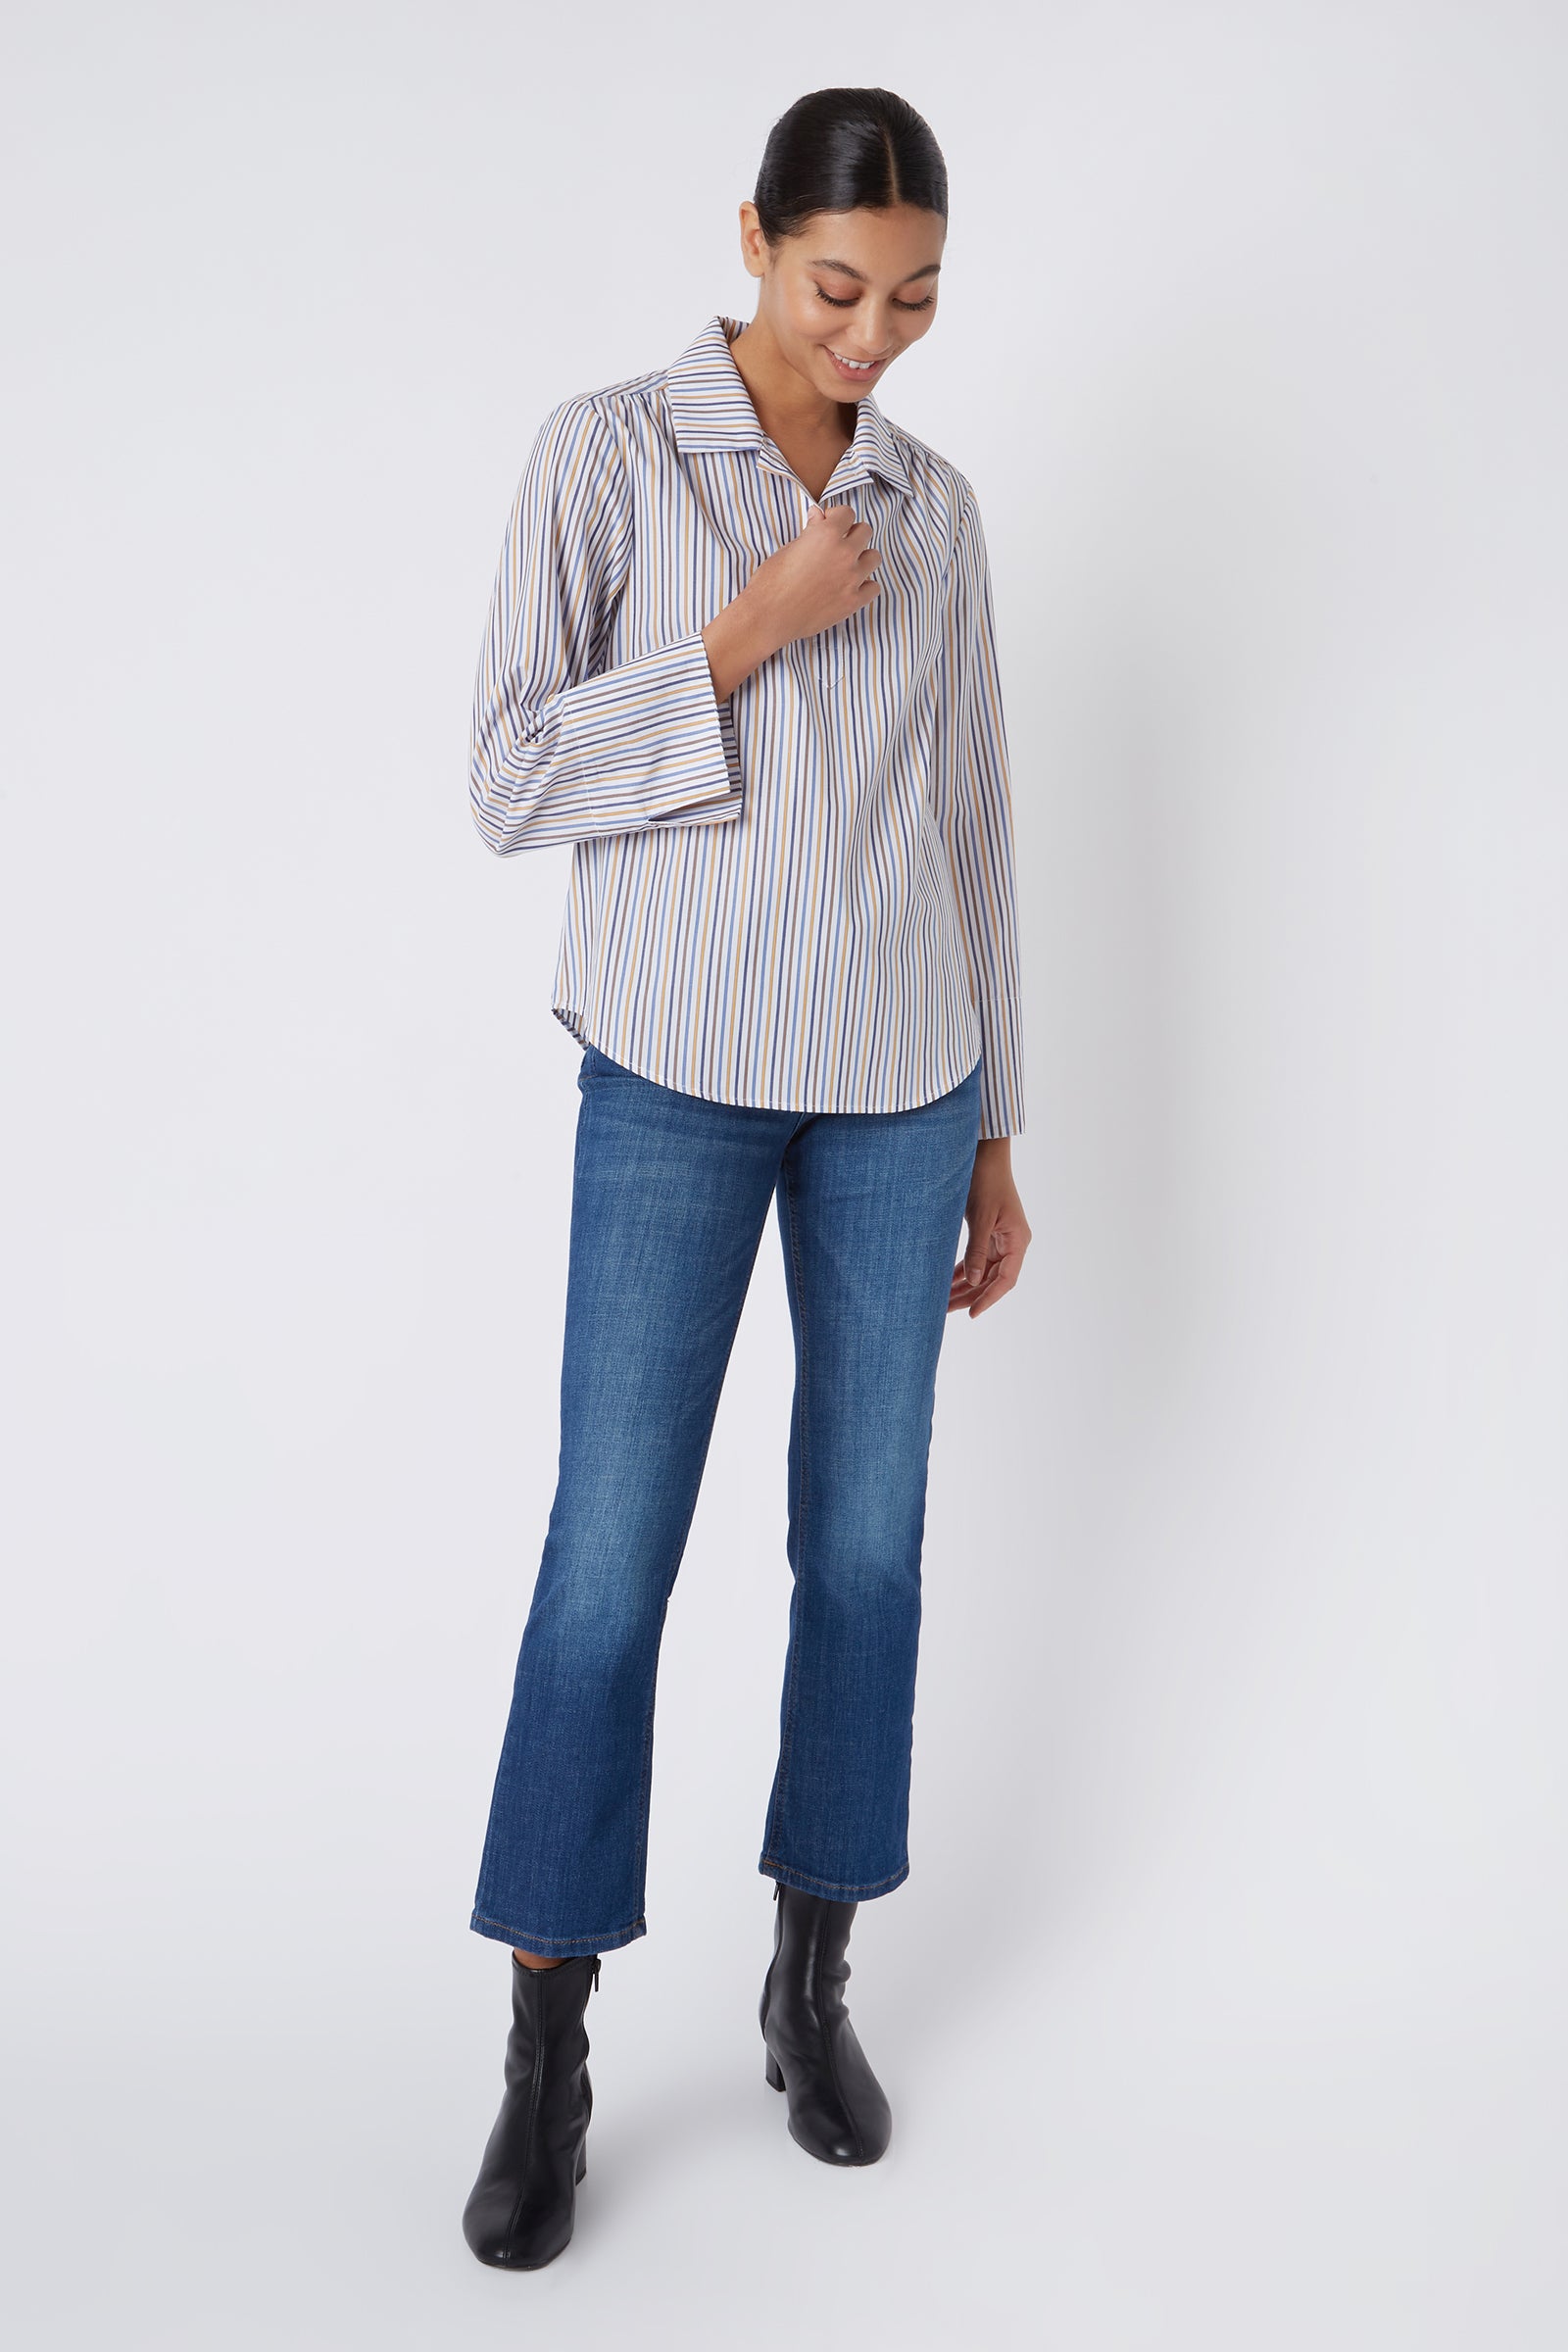 Kal Rieman Edie Collared Placket Shirt in Multi Stripe Gold on Model Looking Down Full Front View